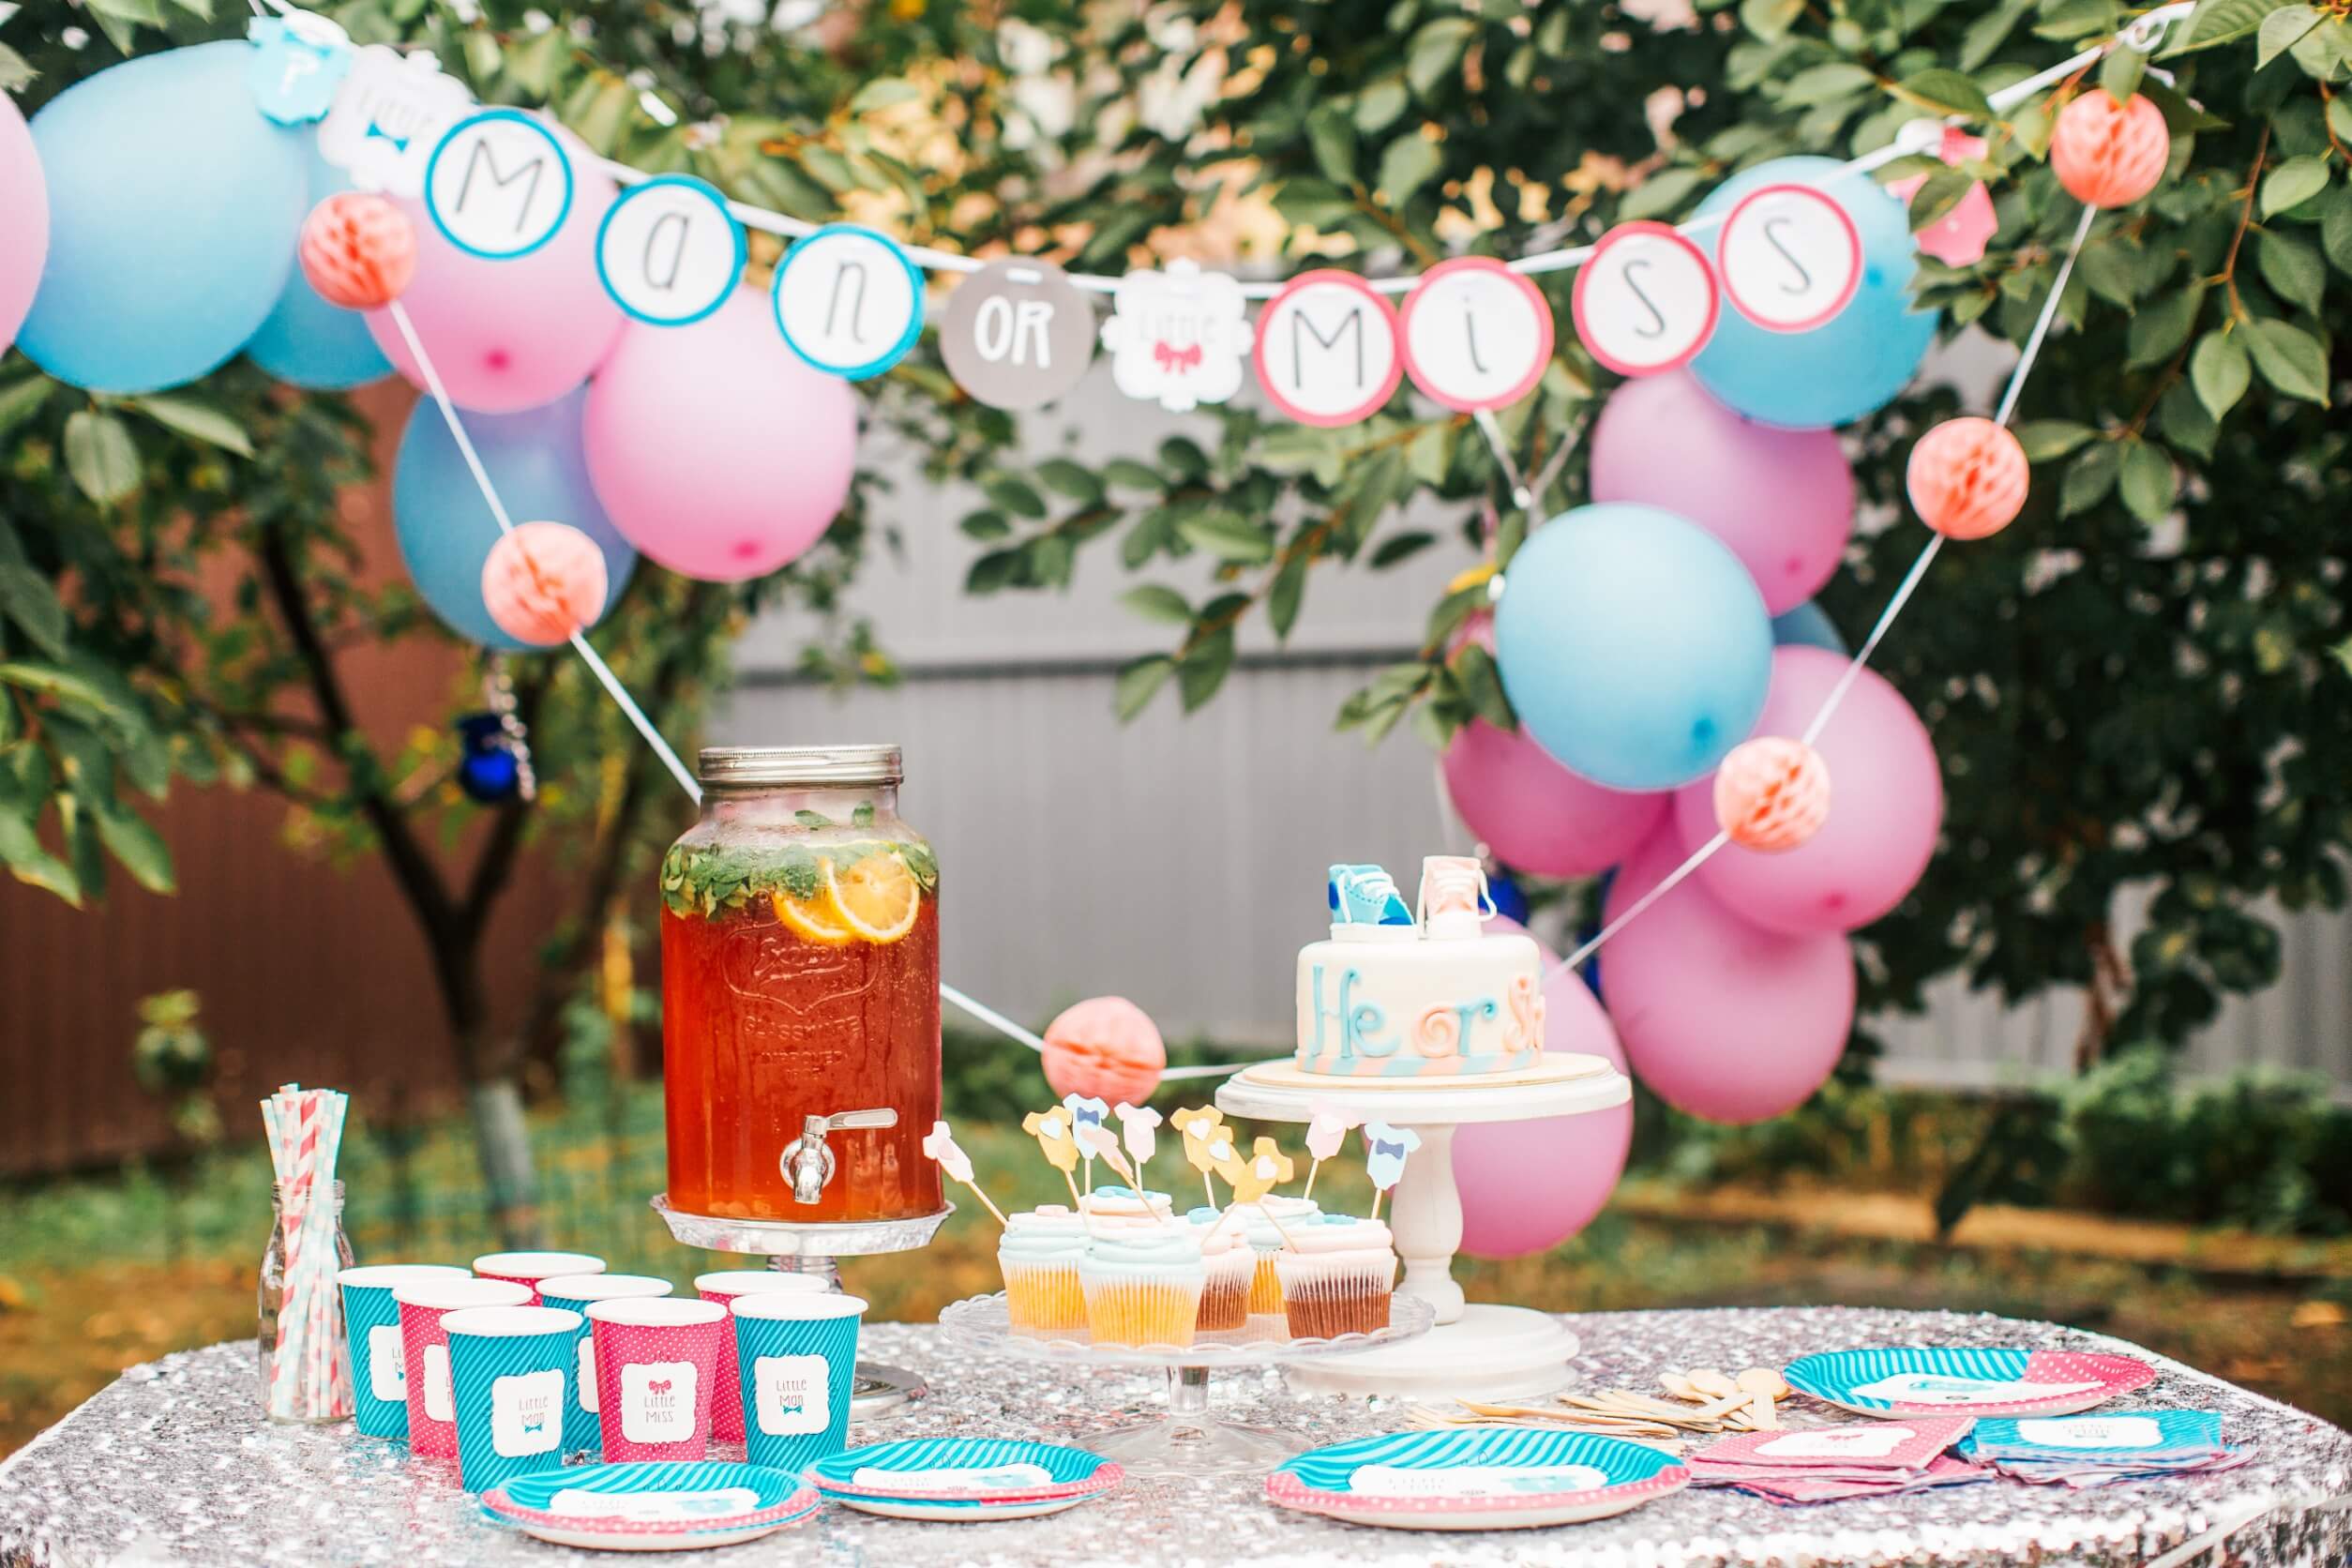 A table with tea and cupcakes to make a gender announcement.